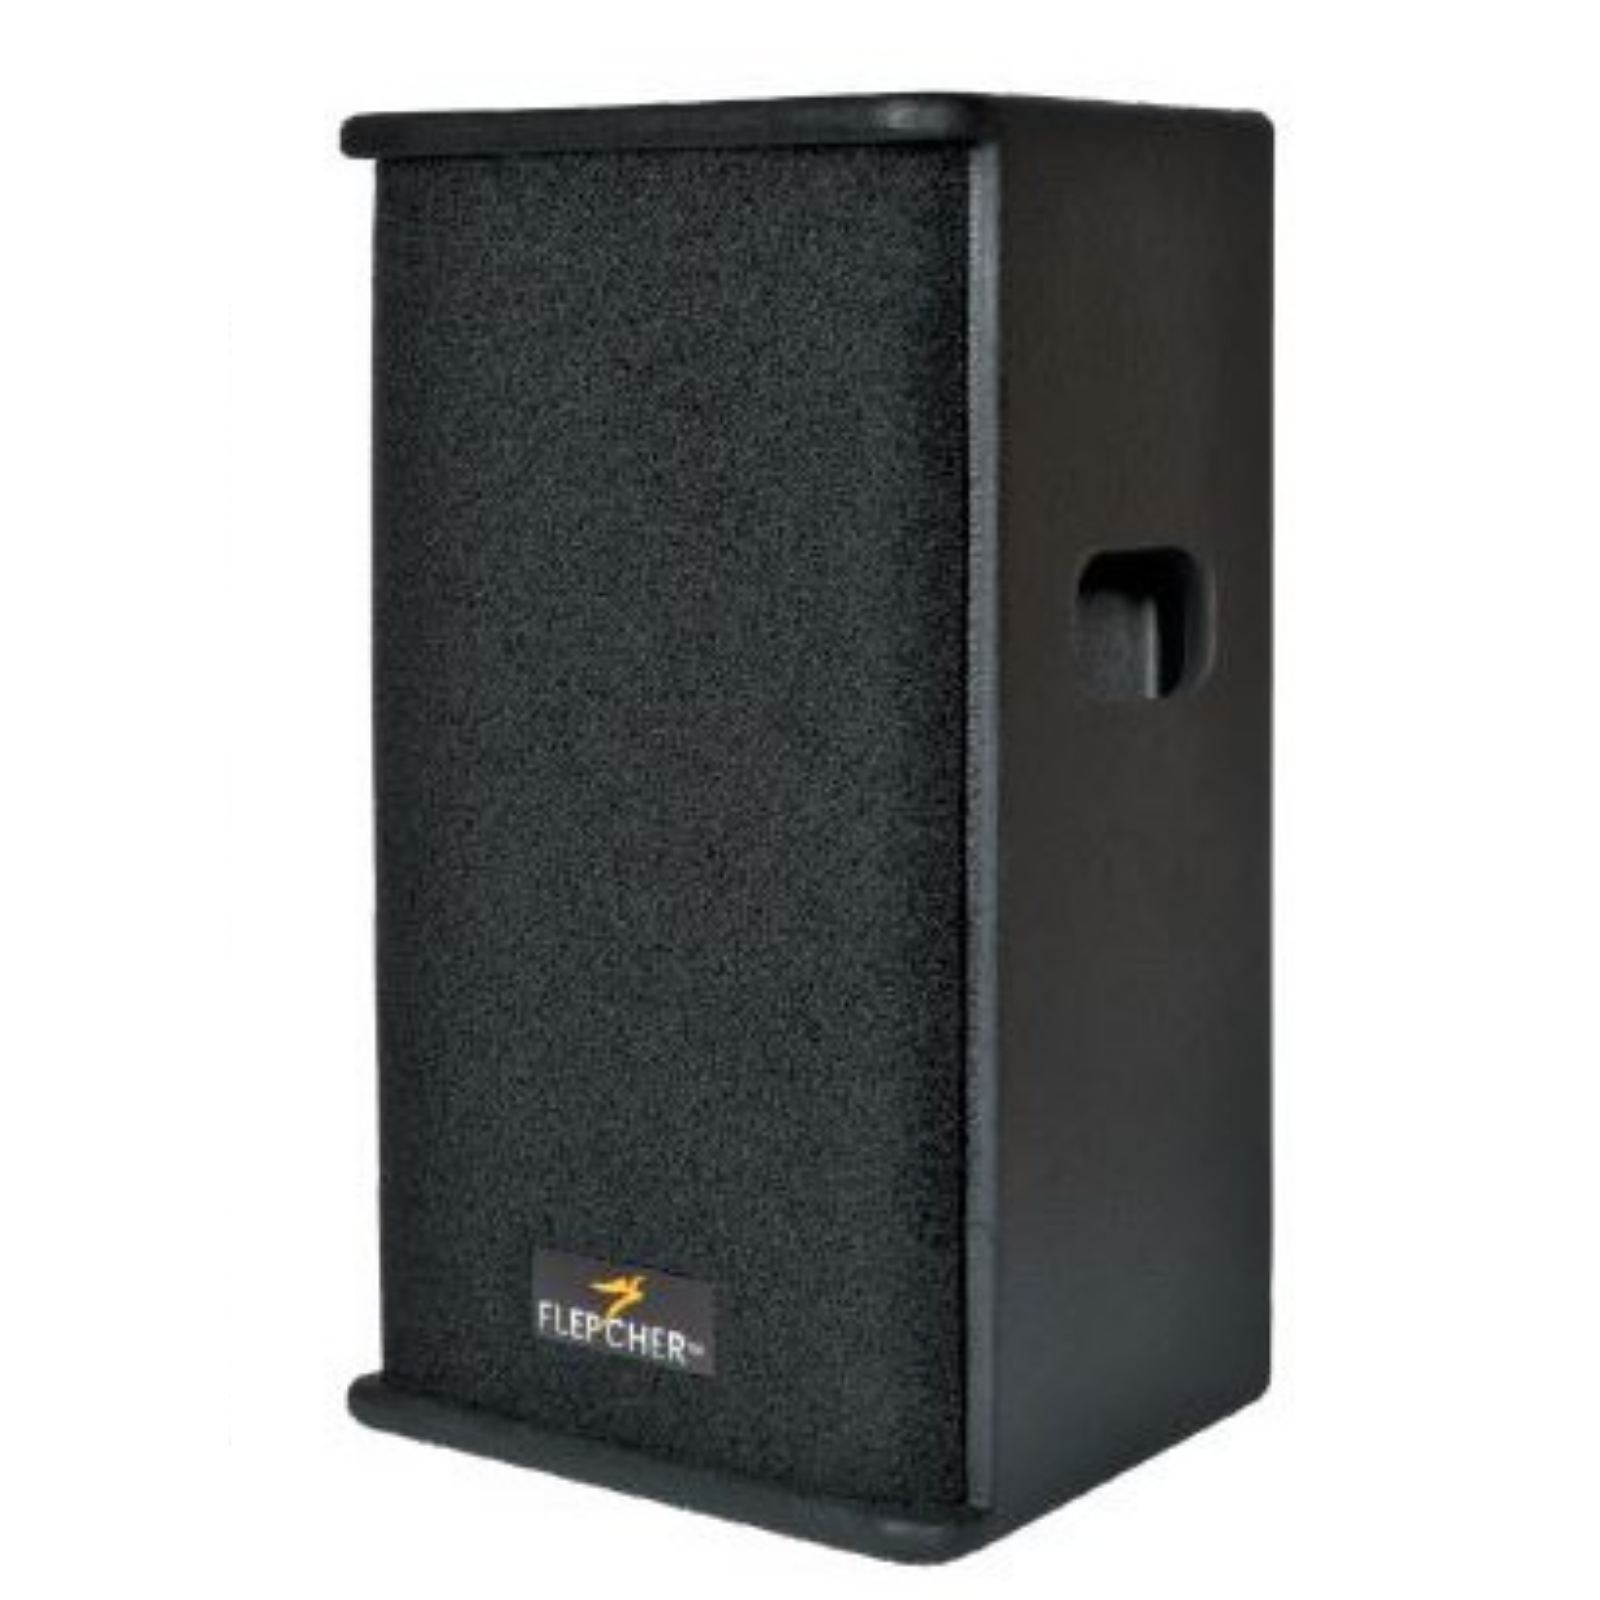 FLEPCHER NX-8 8INCH 2 WAY PROFESSIONAL PASSIVE LOUDSPEAKER, FLEPCHER, PORTABLE PA SPEAKER, flepcher-portable-pa-speaker-nx8, ZOSO MUSIC SDN BHD